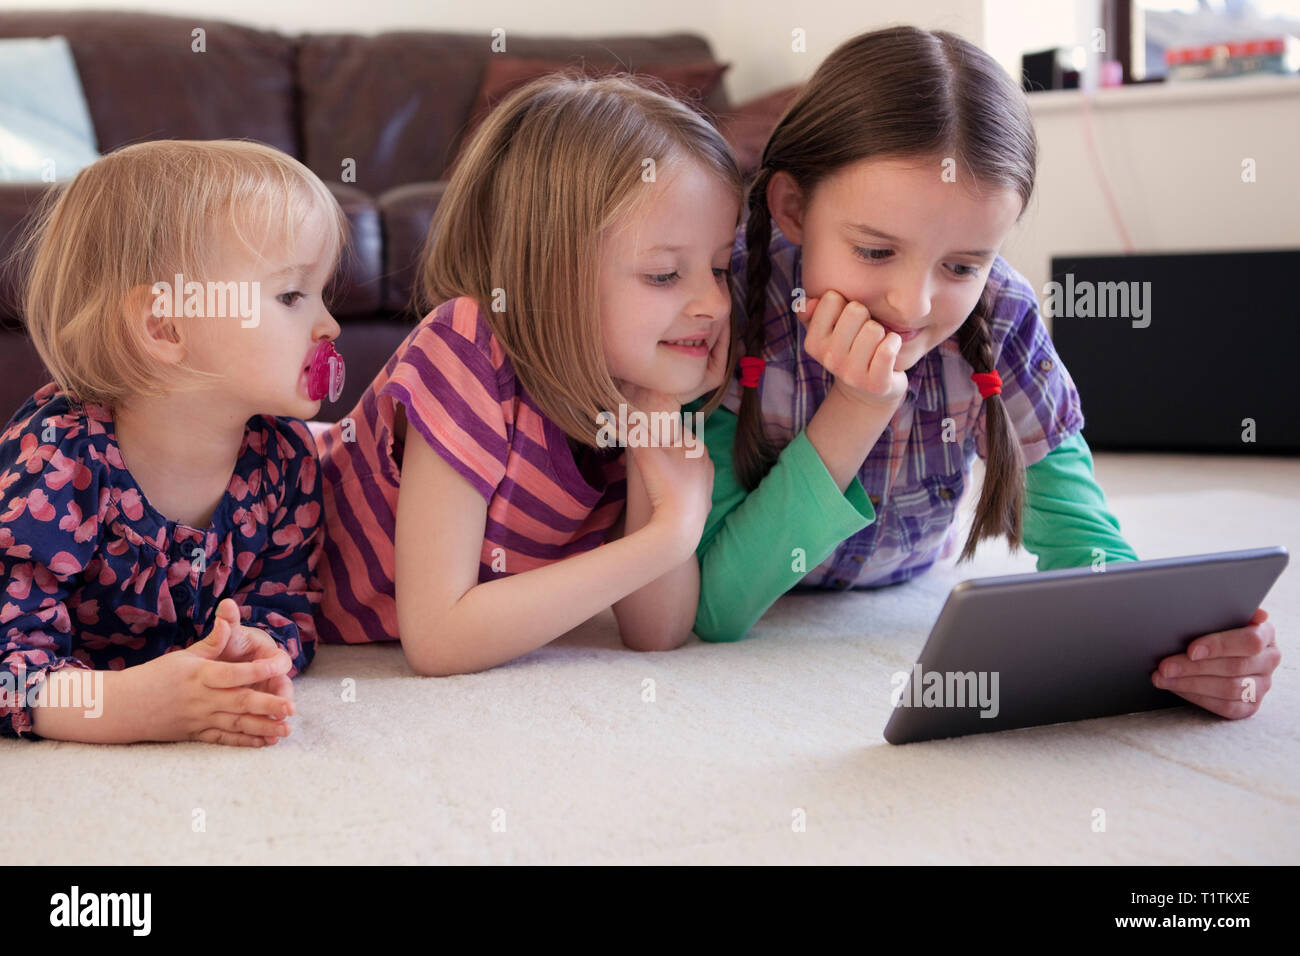 Three children using a tablet device together Stock Photo